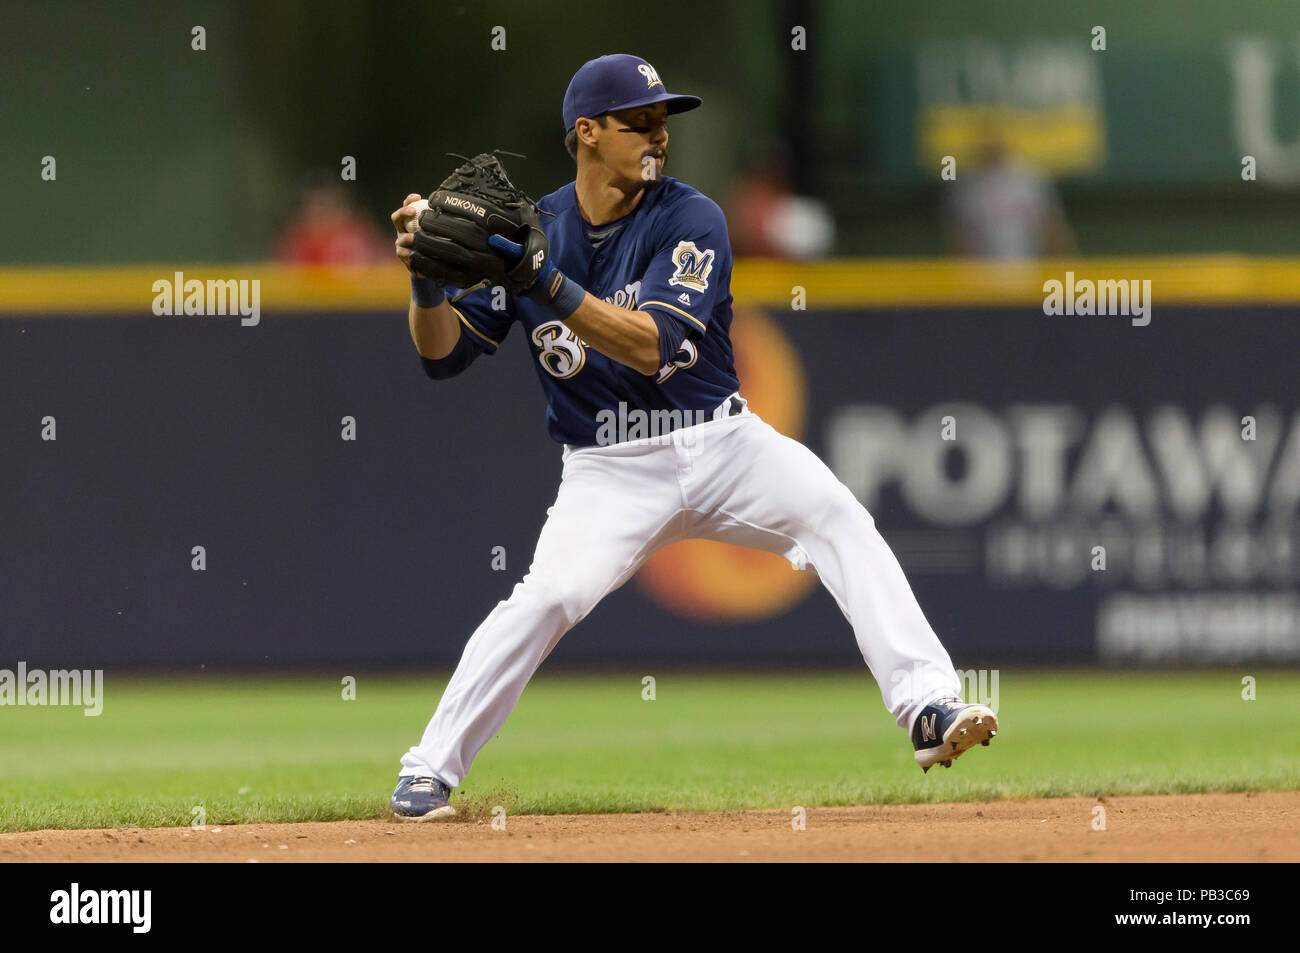 Milwaukee, WI, USA. 24th July, 2018. Milwaukee Brewers second baseman Tyler Saladino #13 in action during the Major League Baseball game between the Milwaukee Brewers and the Washington Nationals at Miller Park in Milwaukee, WI. John Fisher/CSM/Alamy Live News Stock Photo